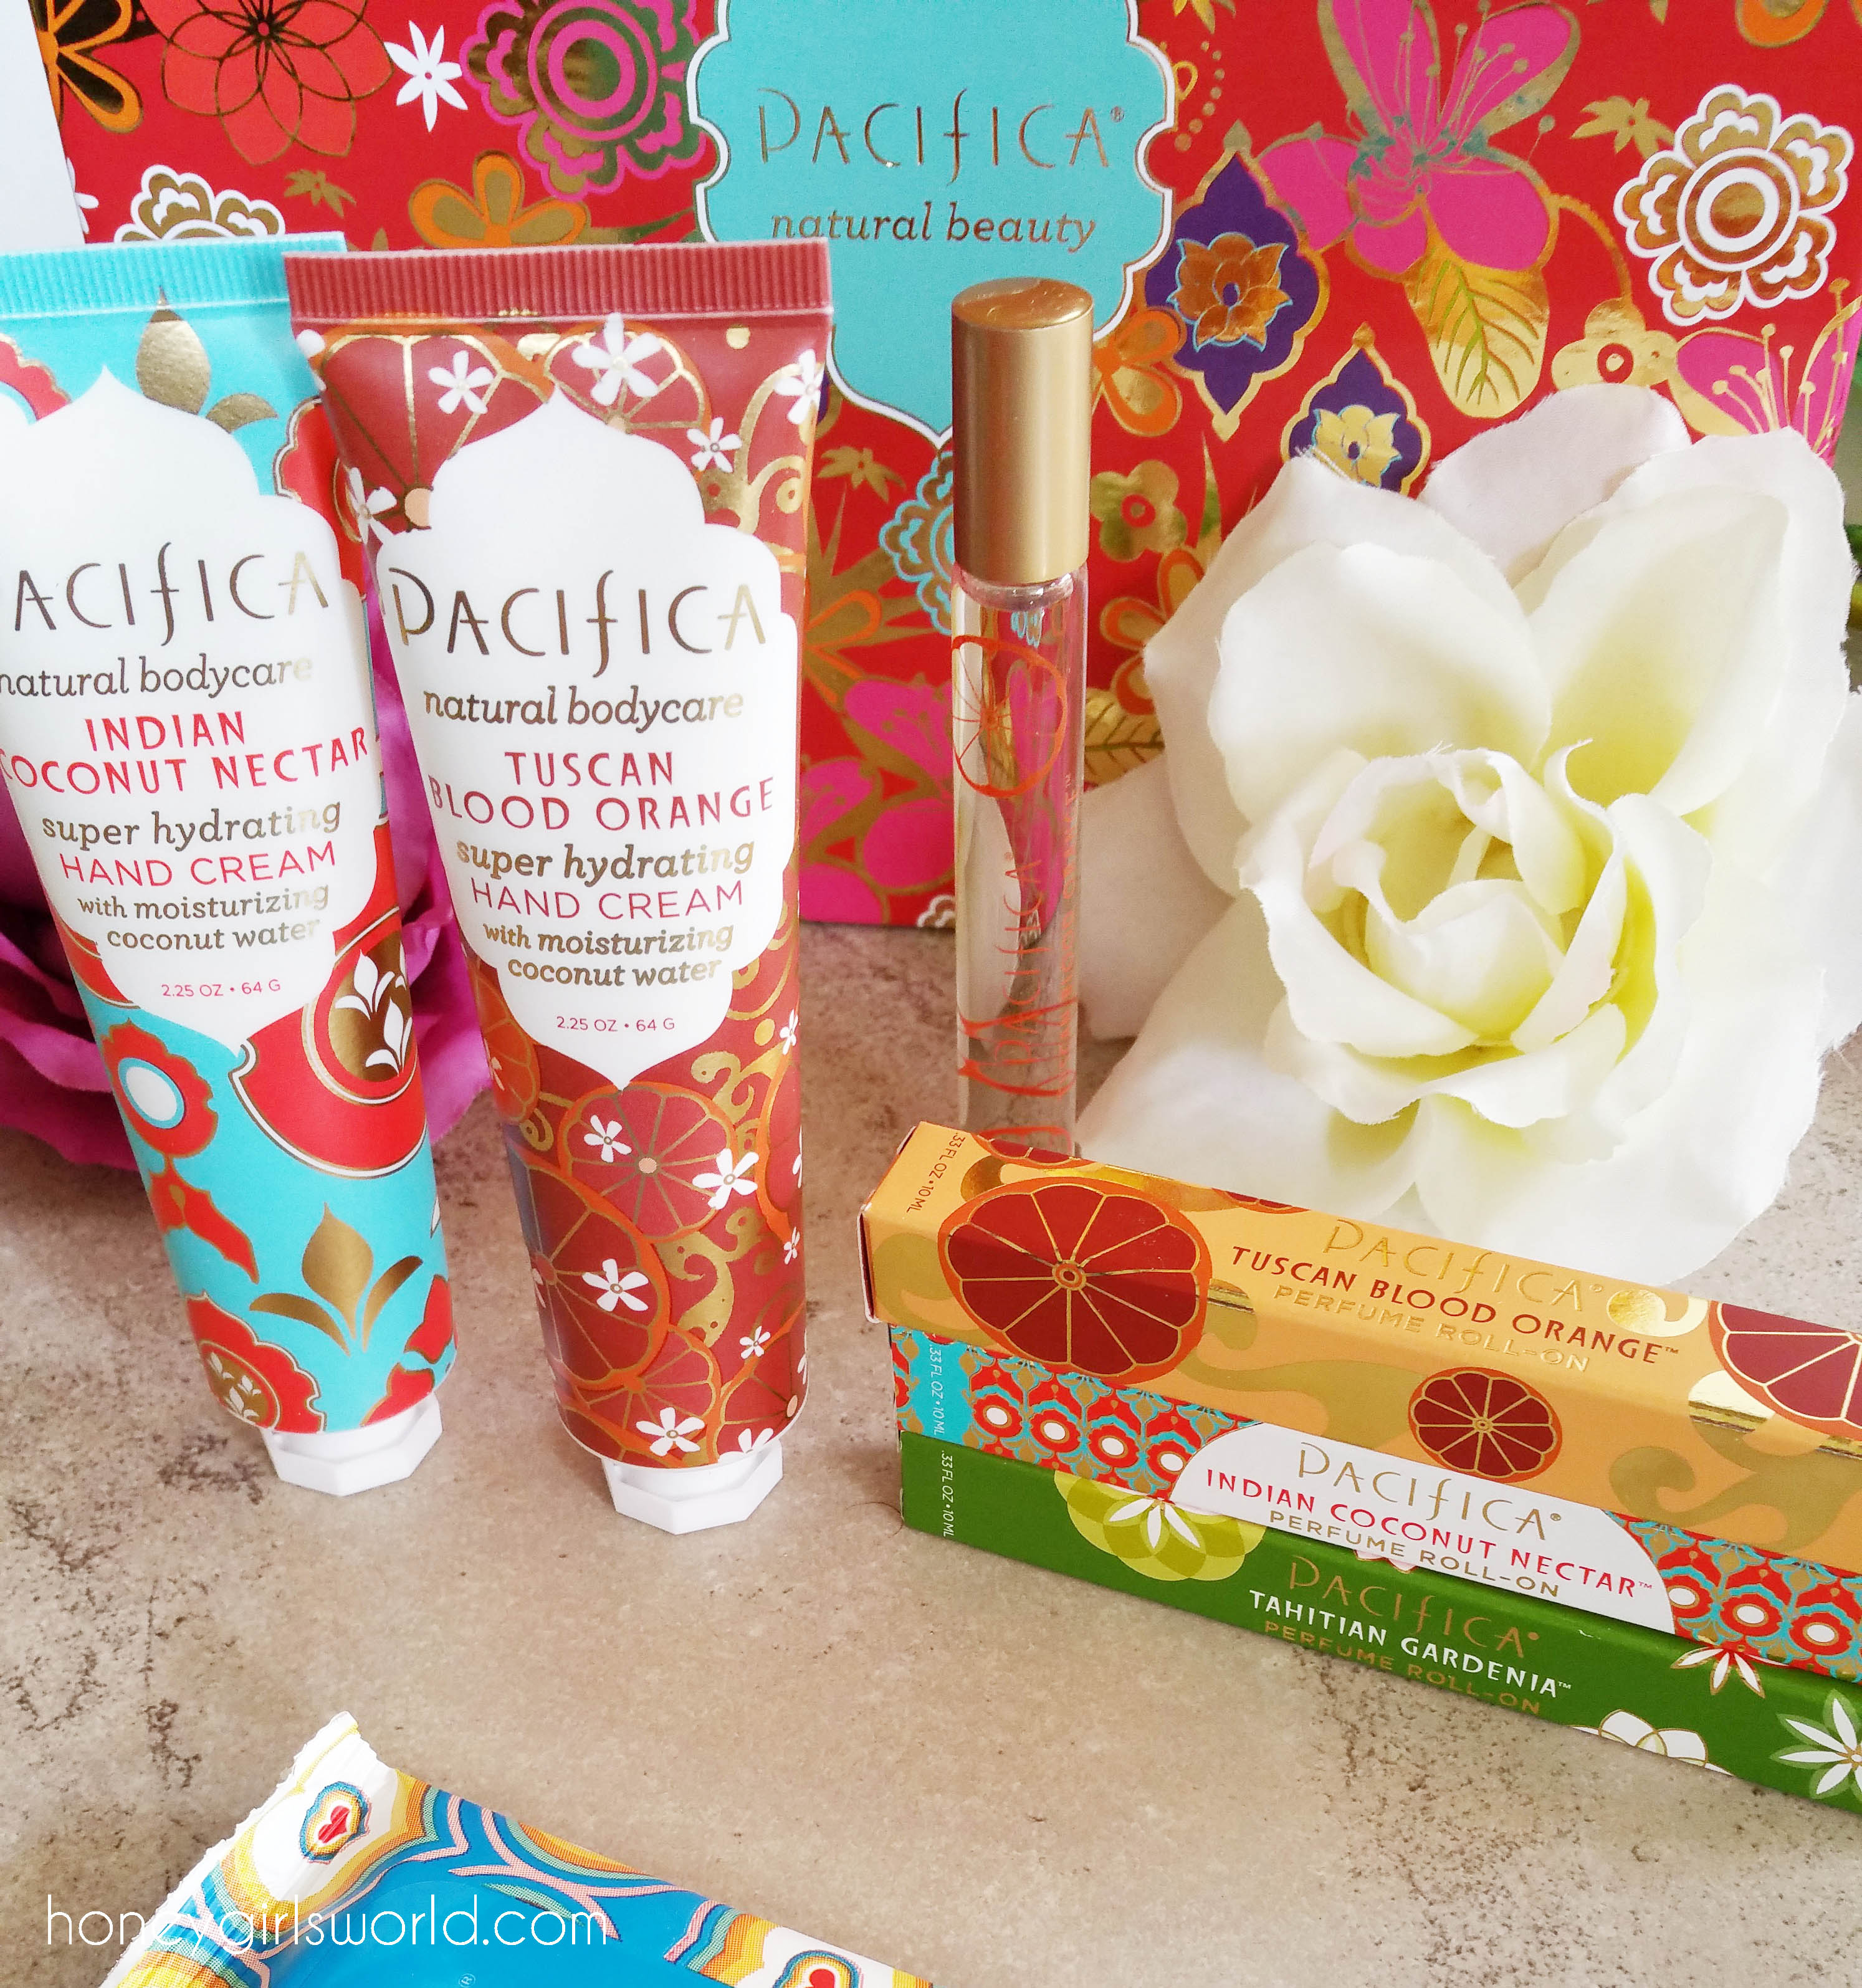 Pacifica, Daydreamer roll-on trio, target, perfume, fragrance, coco pure travel size, super hydrating hand cream, indian coconut nectar hand cream, tuscan blood orange hand cream, made to matter, pacifica beauty, 